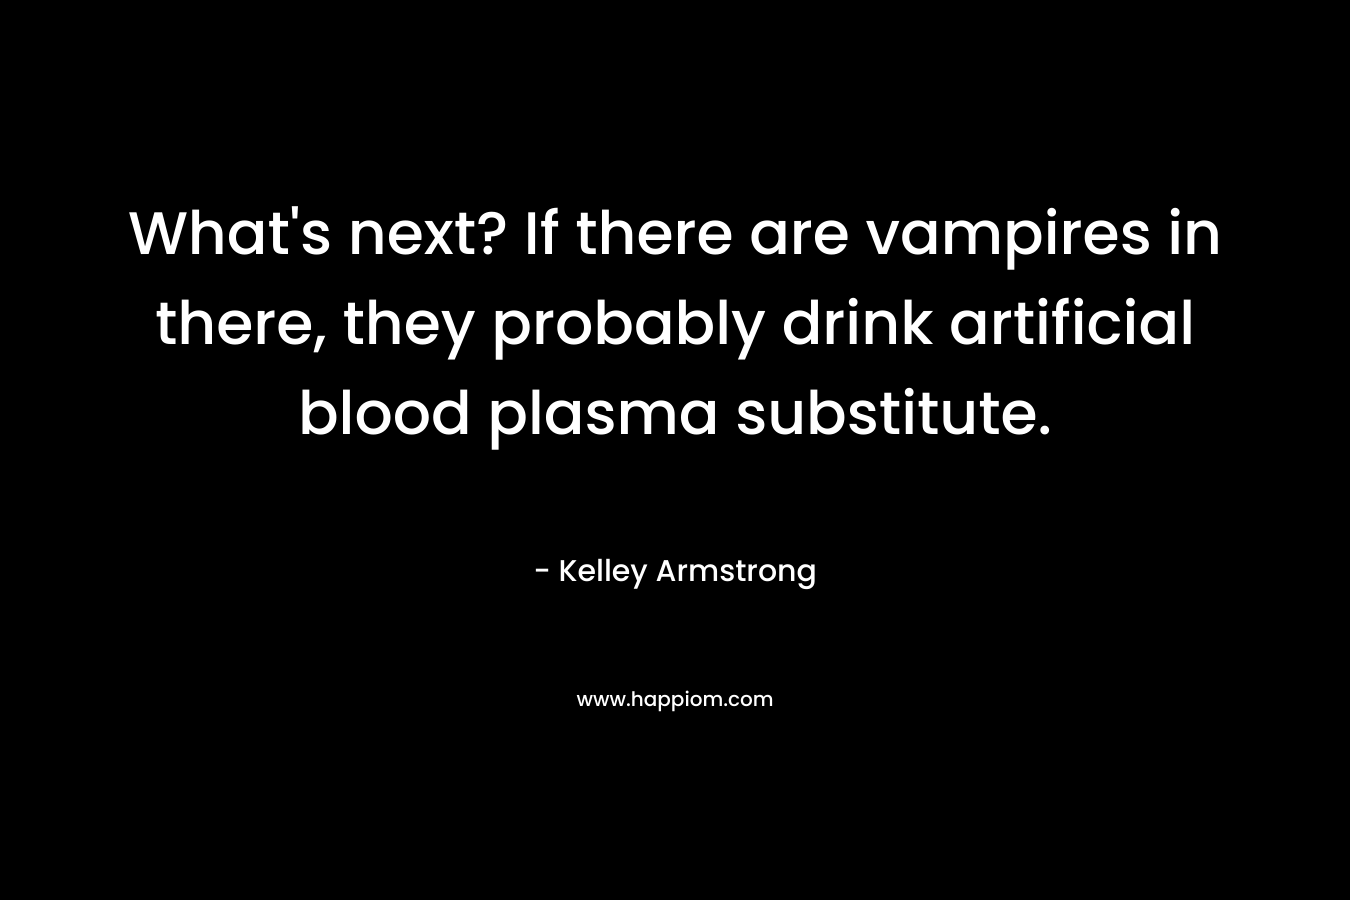 What's next? If there are vampires in there, they probably drink artificial blood plasma substitute.